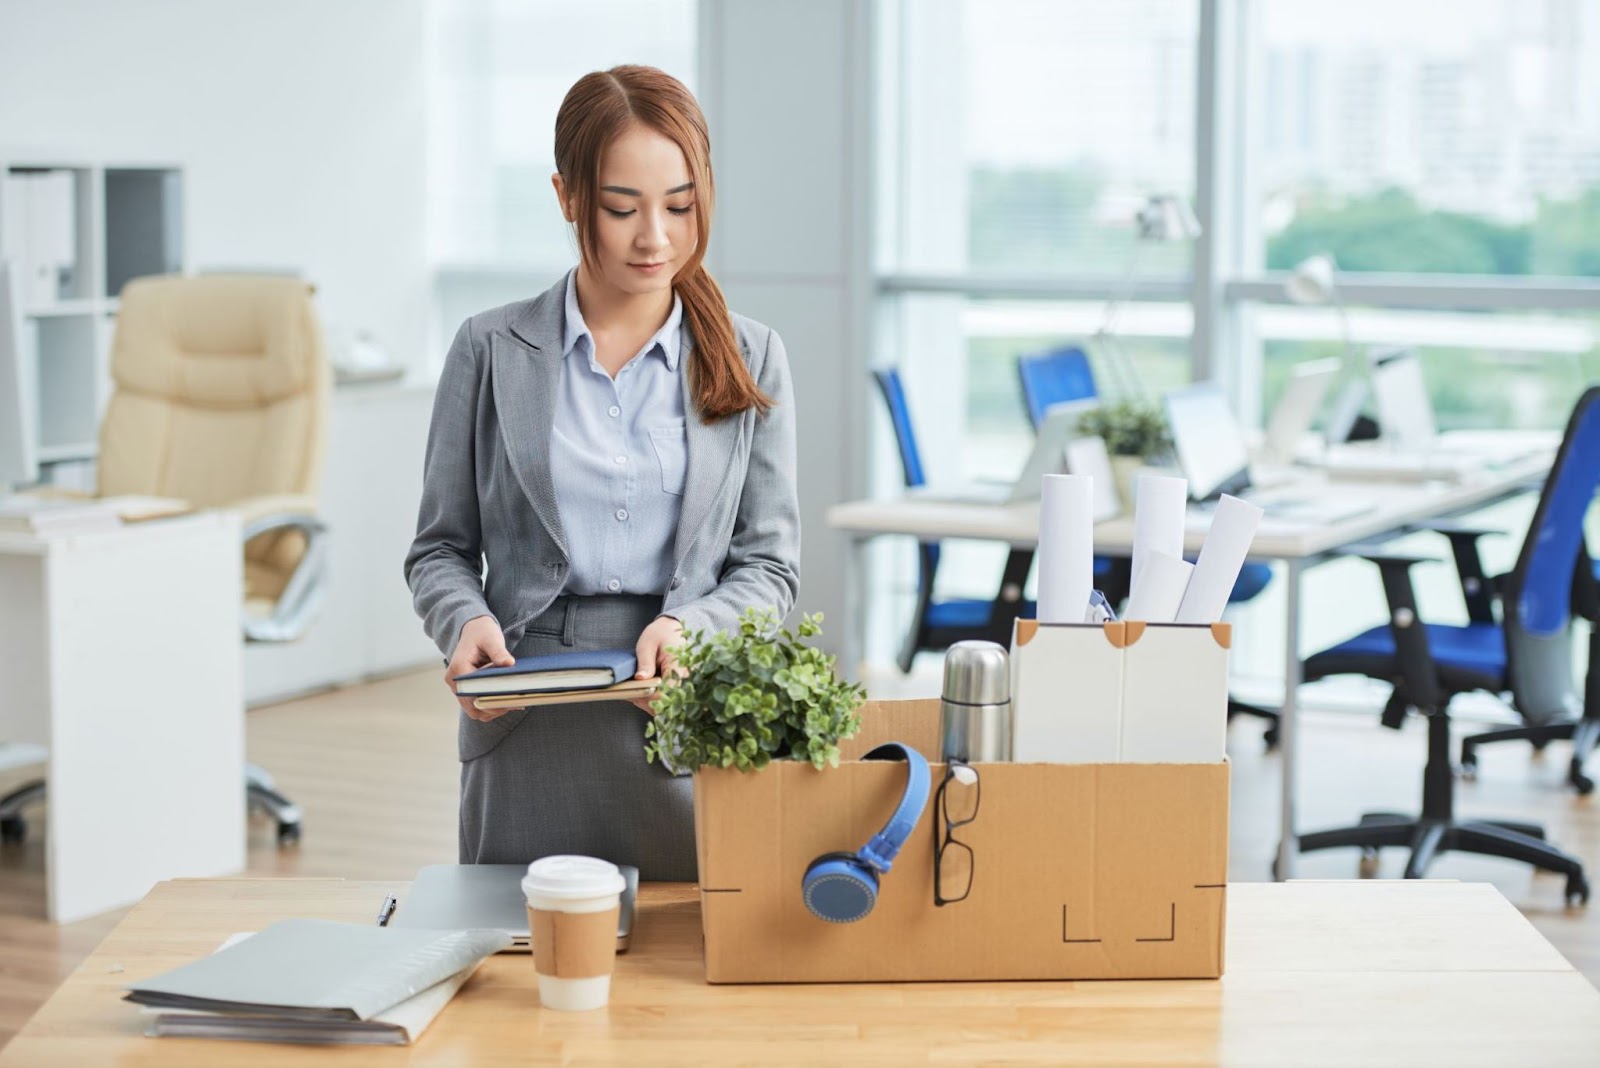 women unpacking her belongings on her first day of work